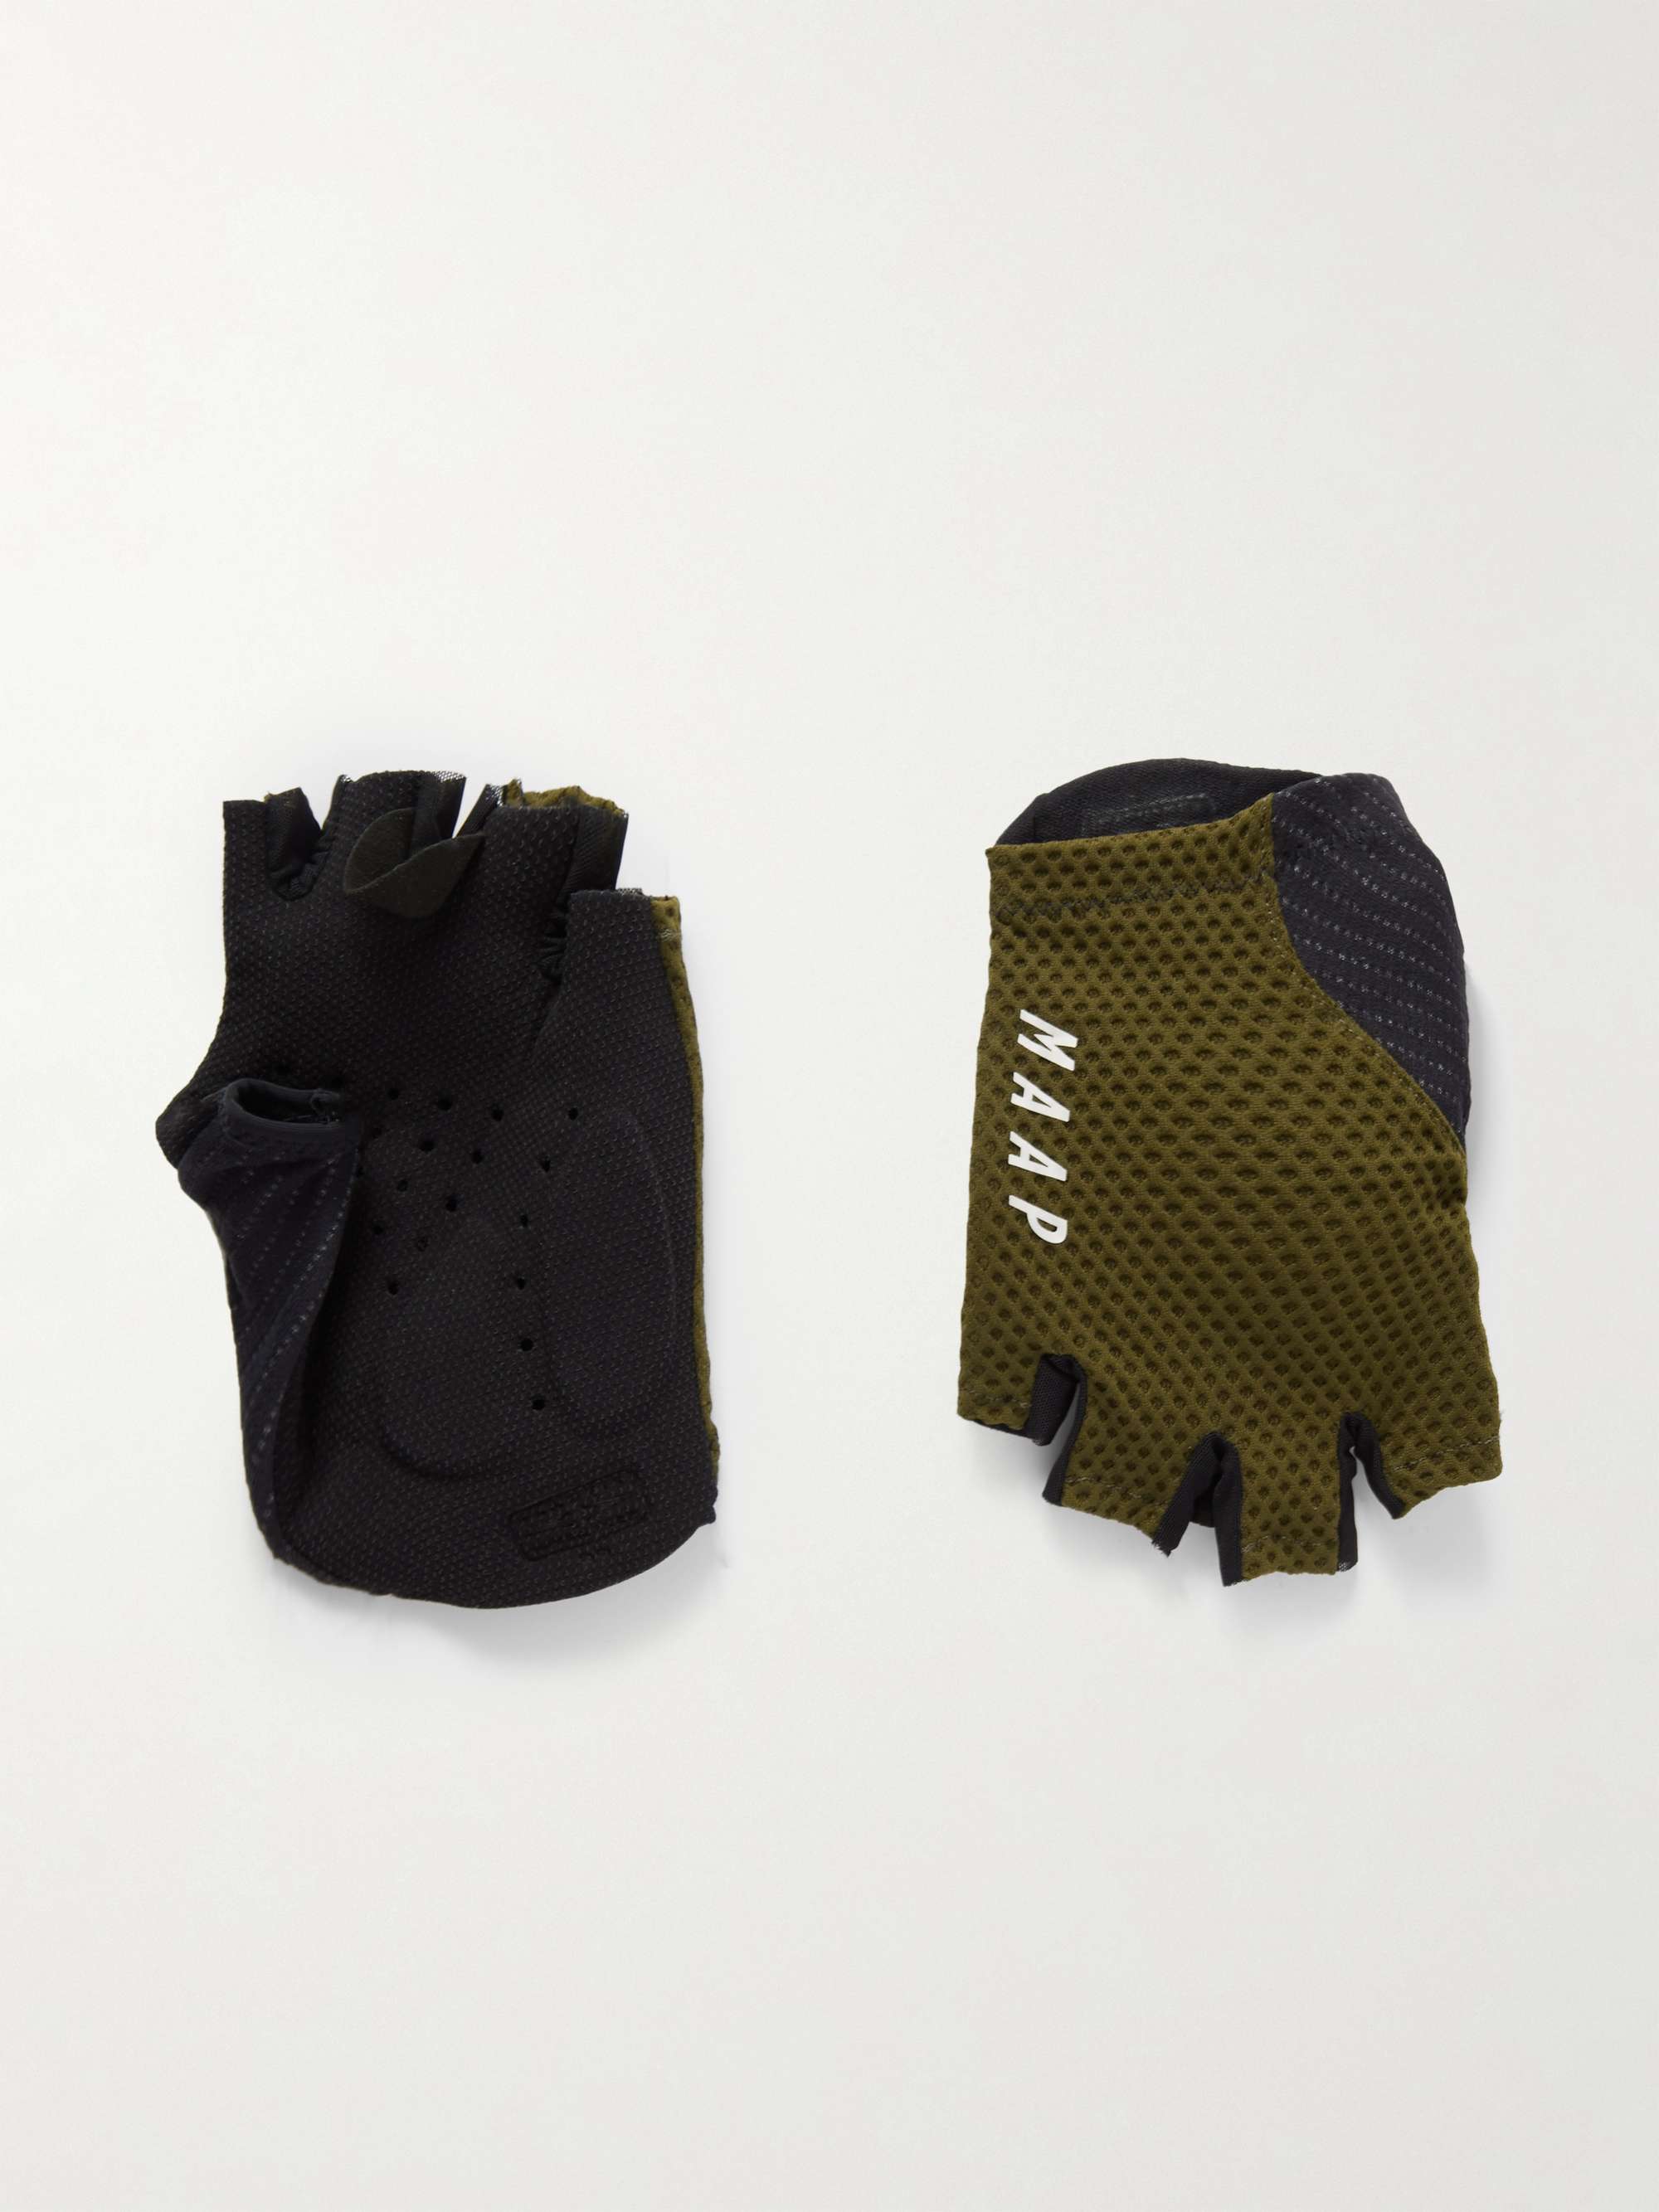 MAAP Pro Race Hybrid Cell System and Mesh Cycling Gloves